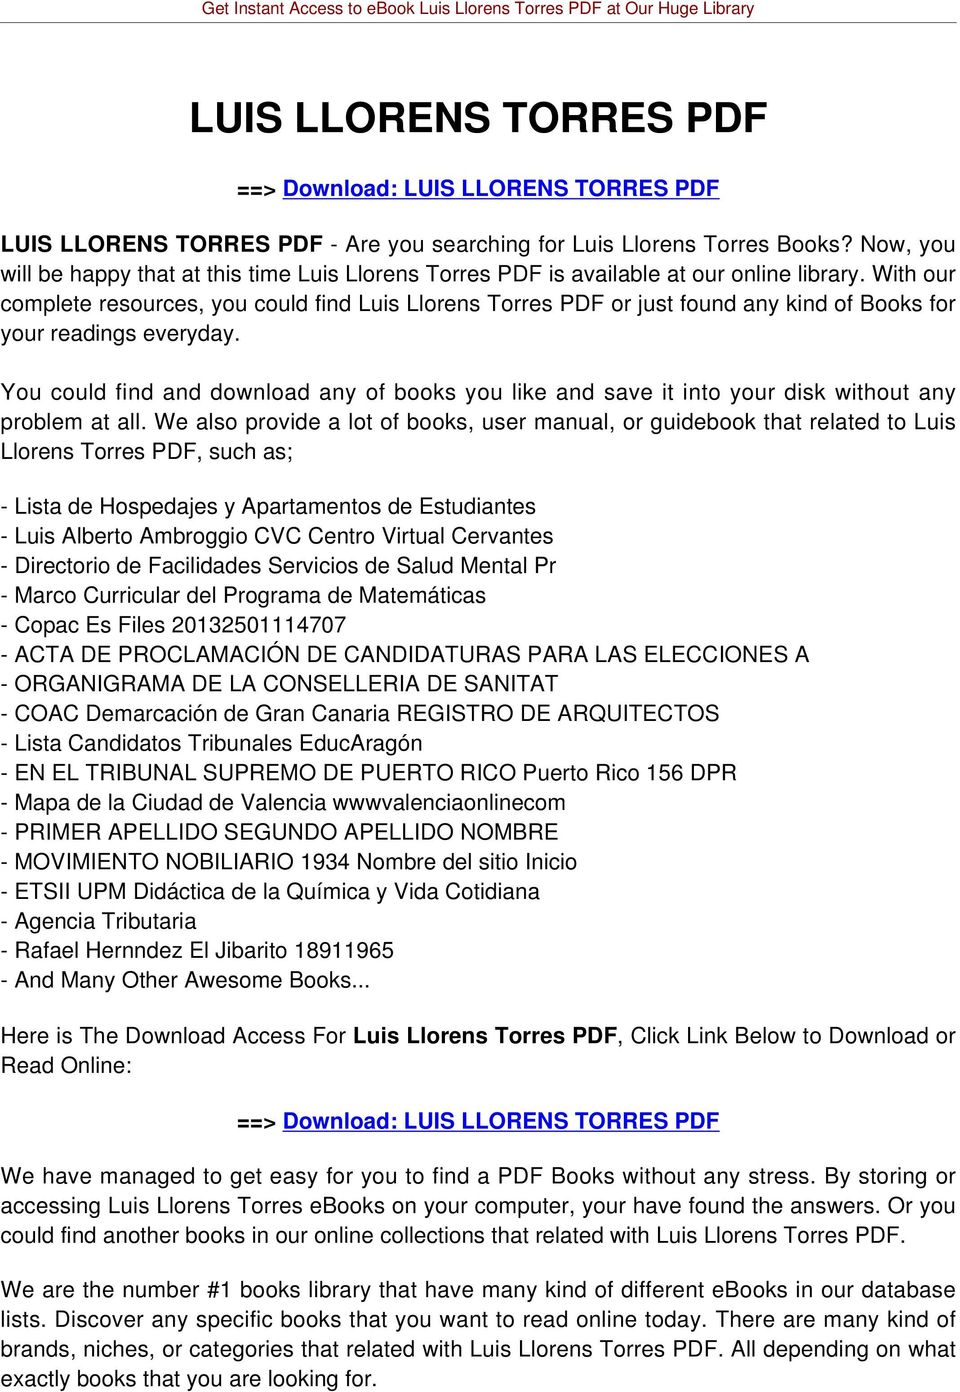 With our complete resources, you could find Luis Llorens Torres PDF or just found any kind of Books for your readings everyday.